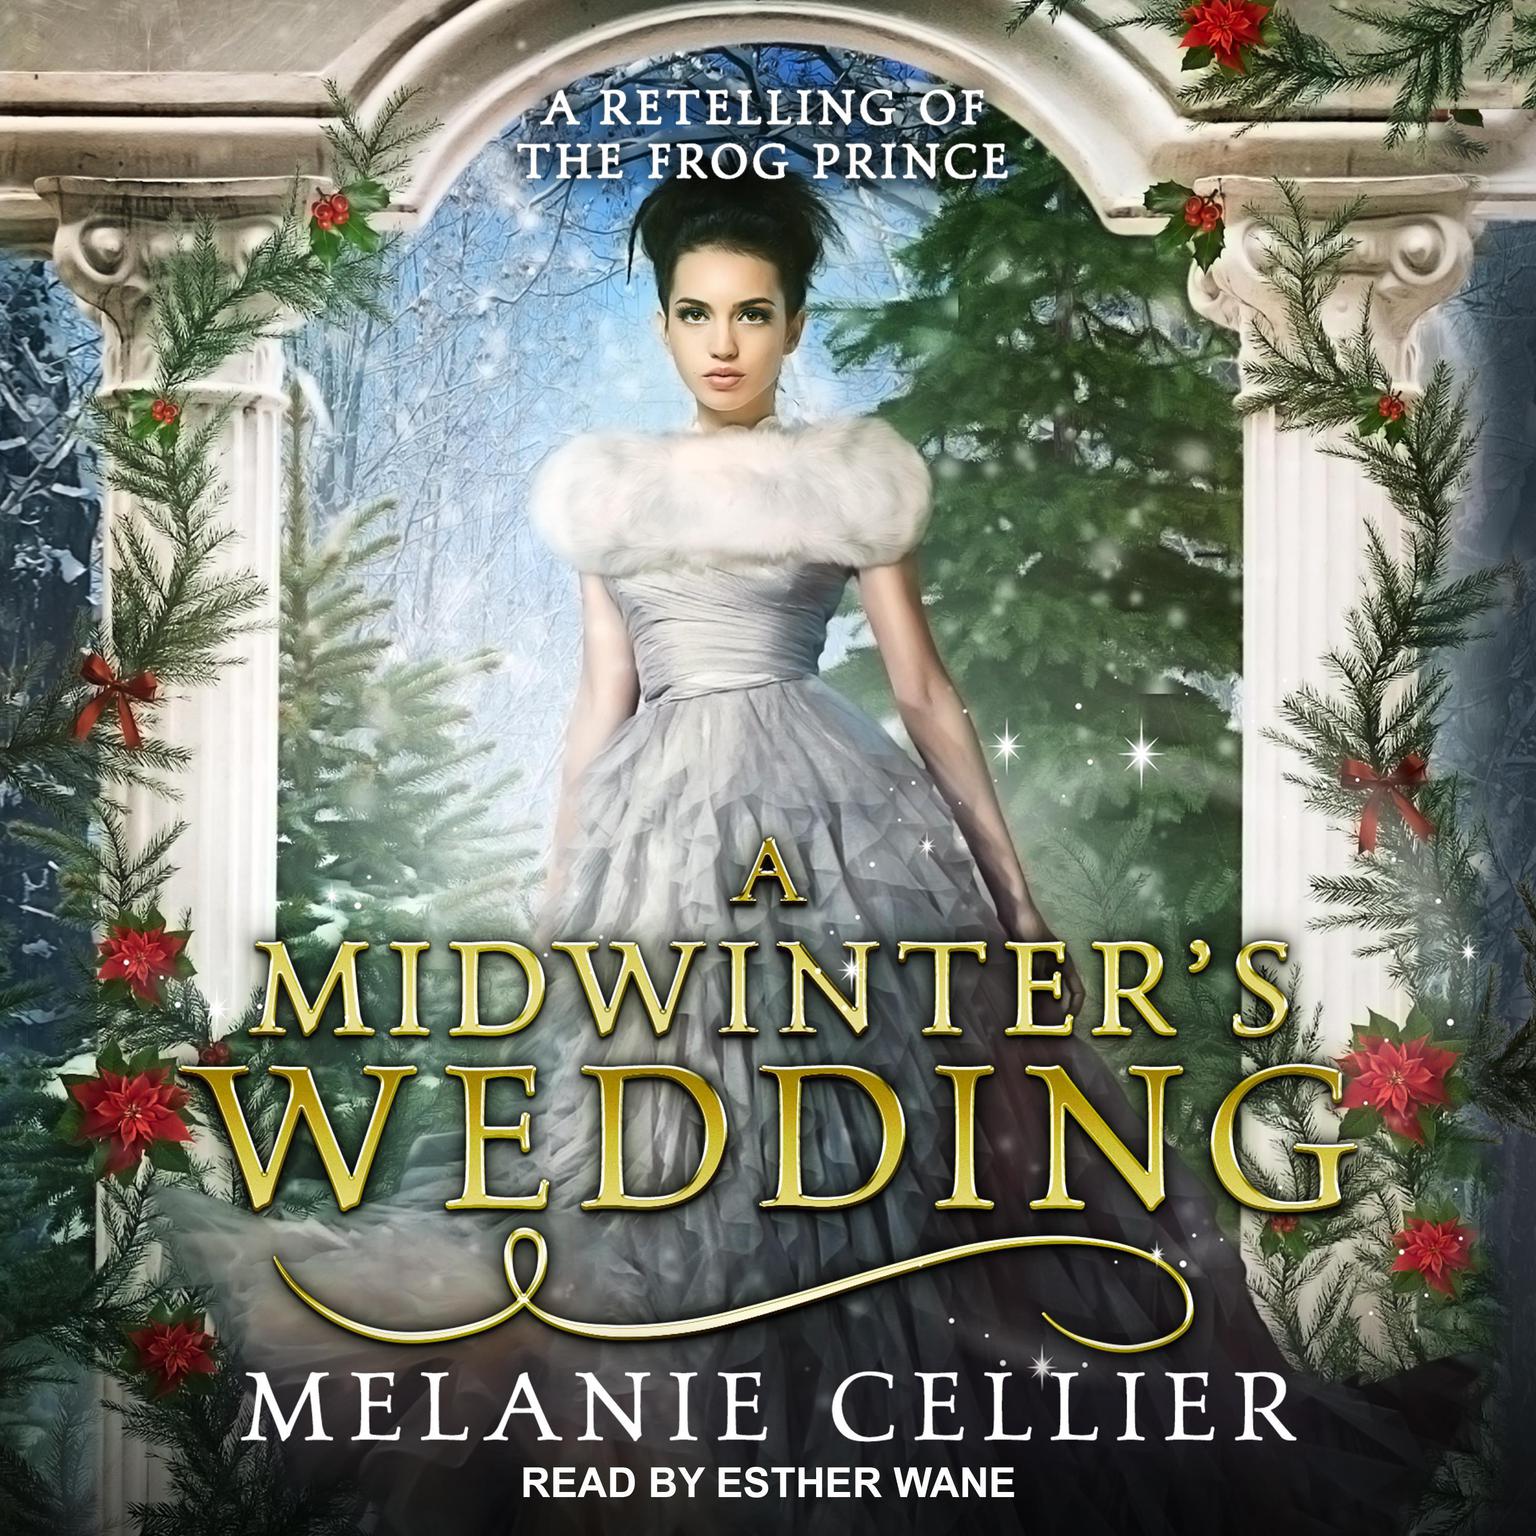 A Midwinters Wedding: A Retelling of The Frog Prince Audiobook, by Melanie Cellier